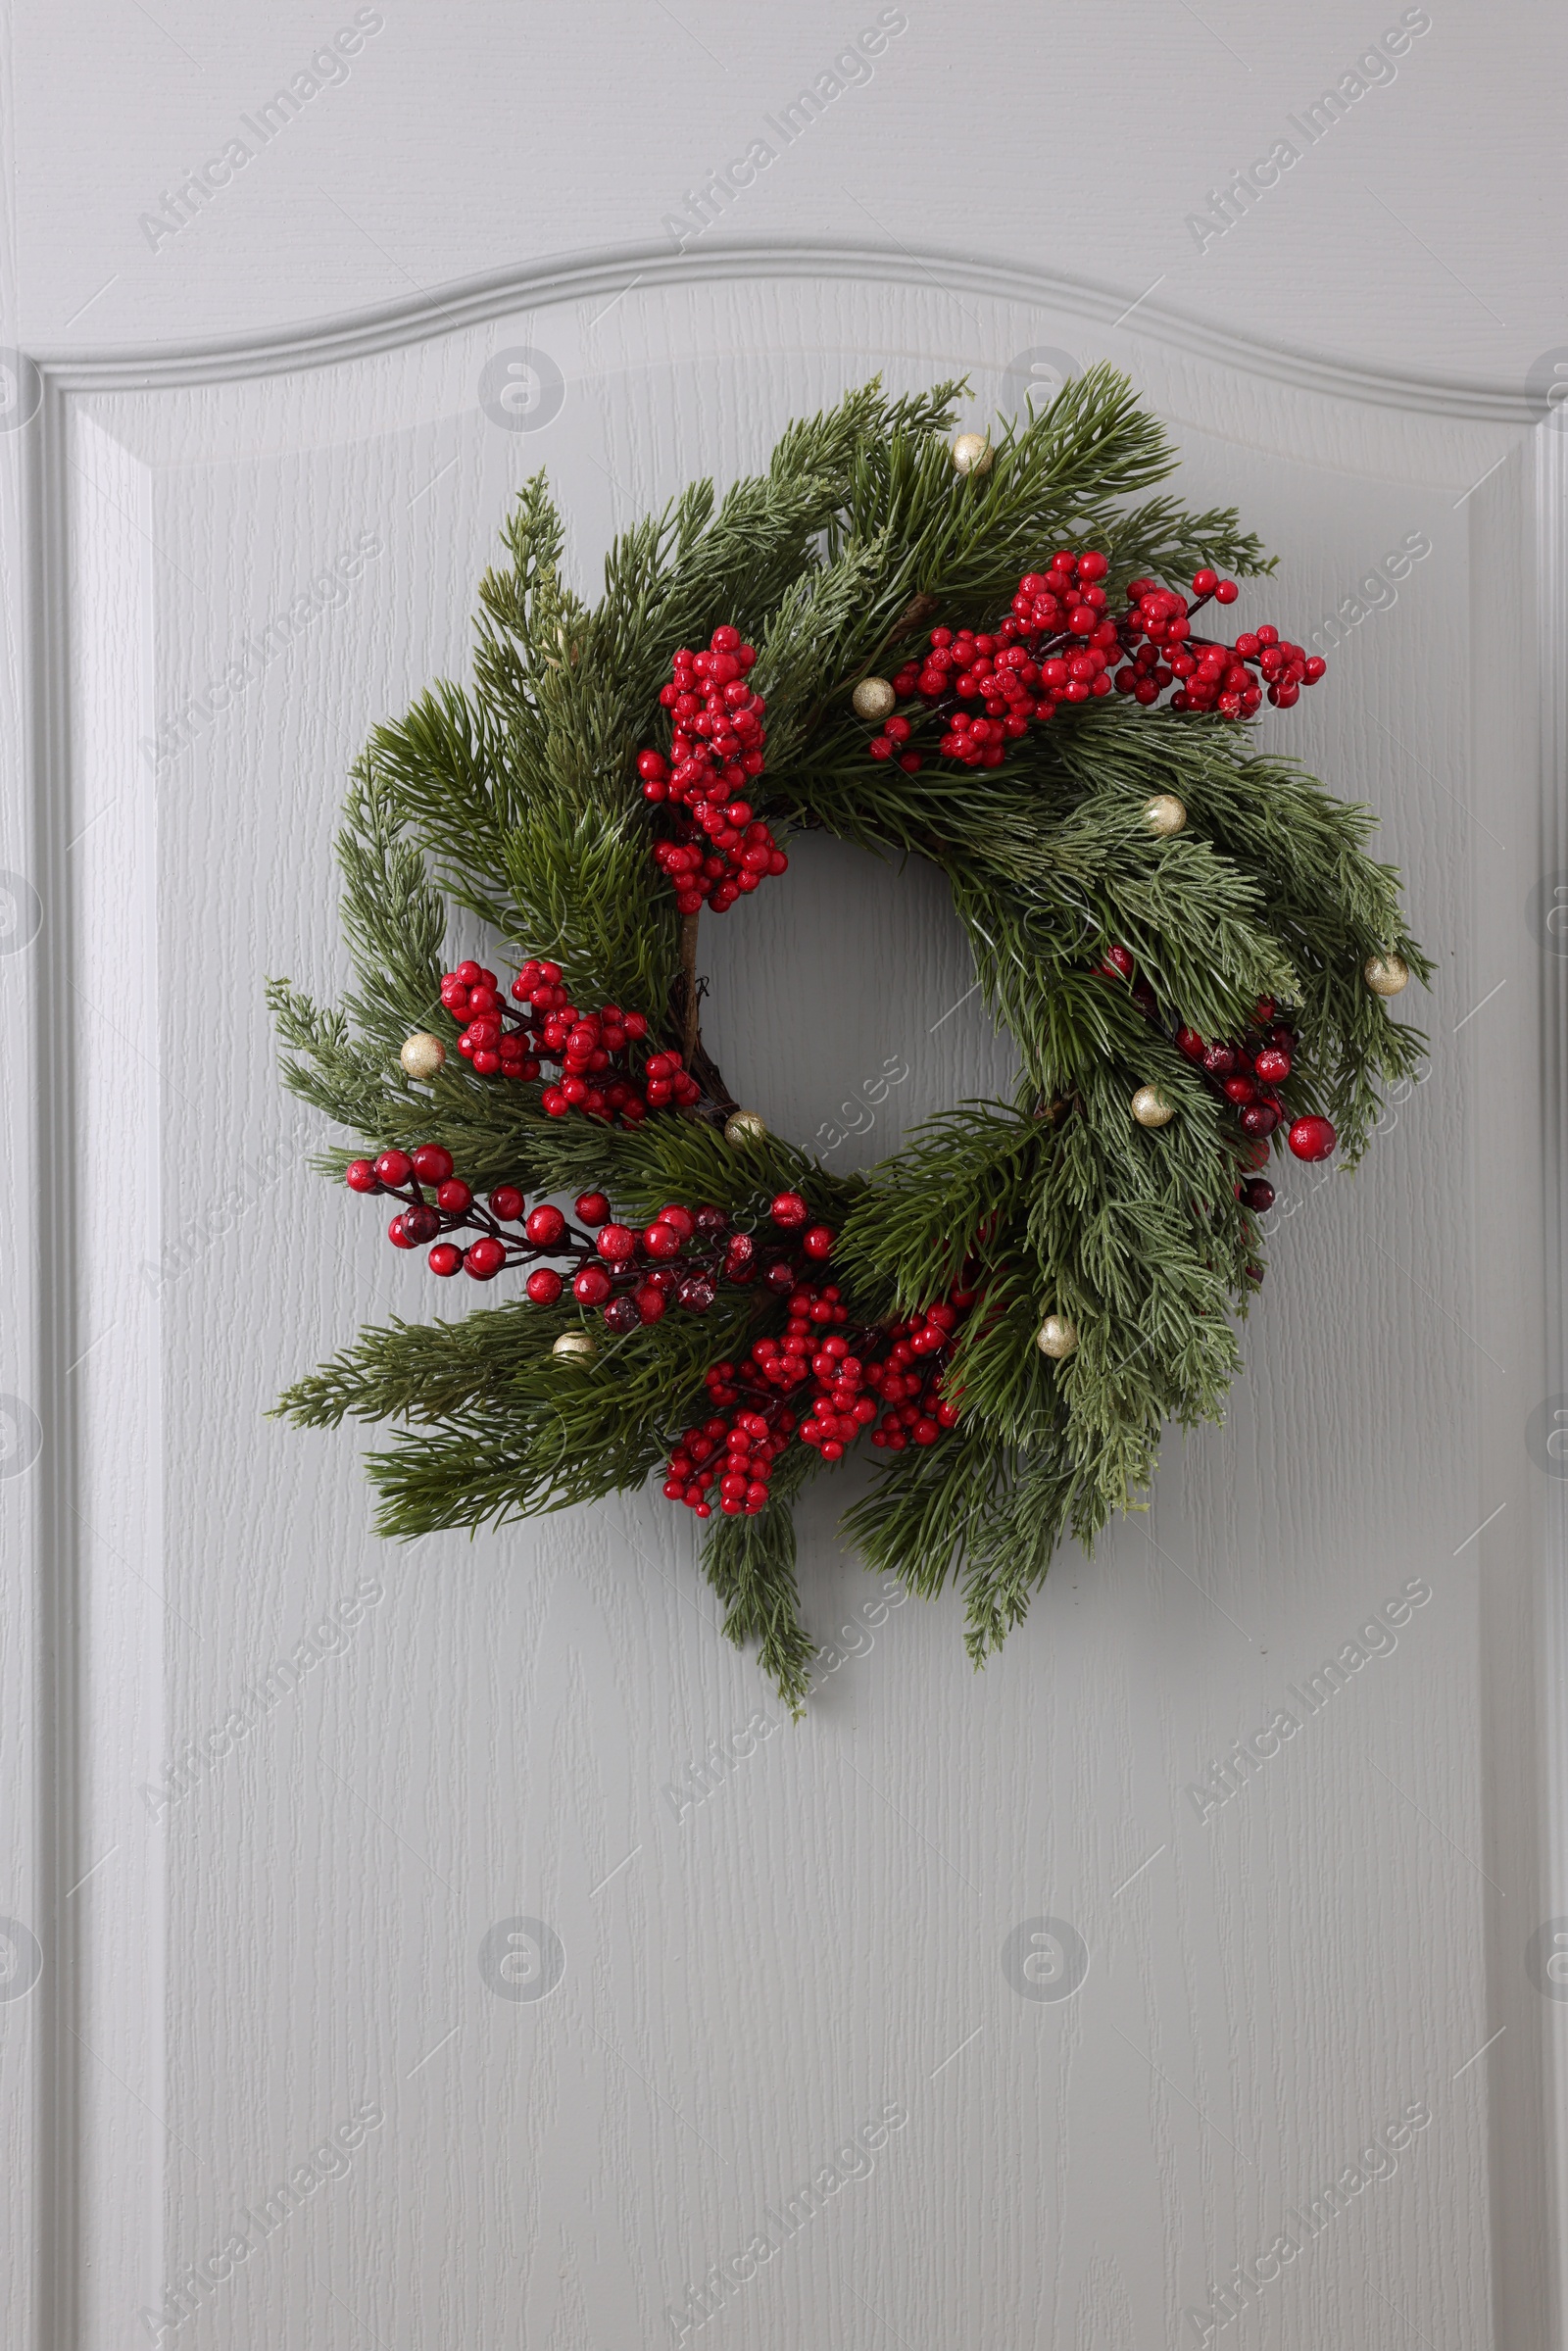 Photo of Beautiful Christmas wreath with red berries and decor hanging on white door